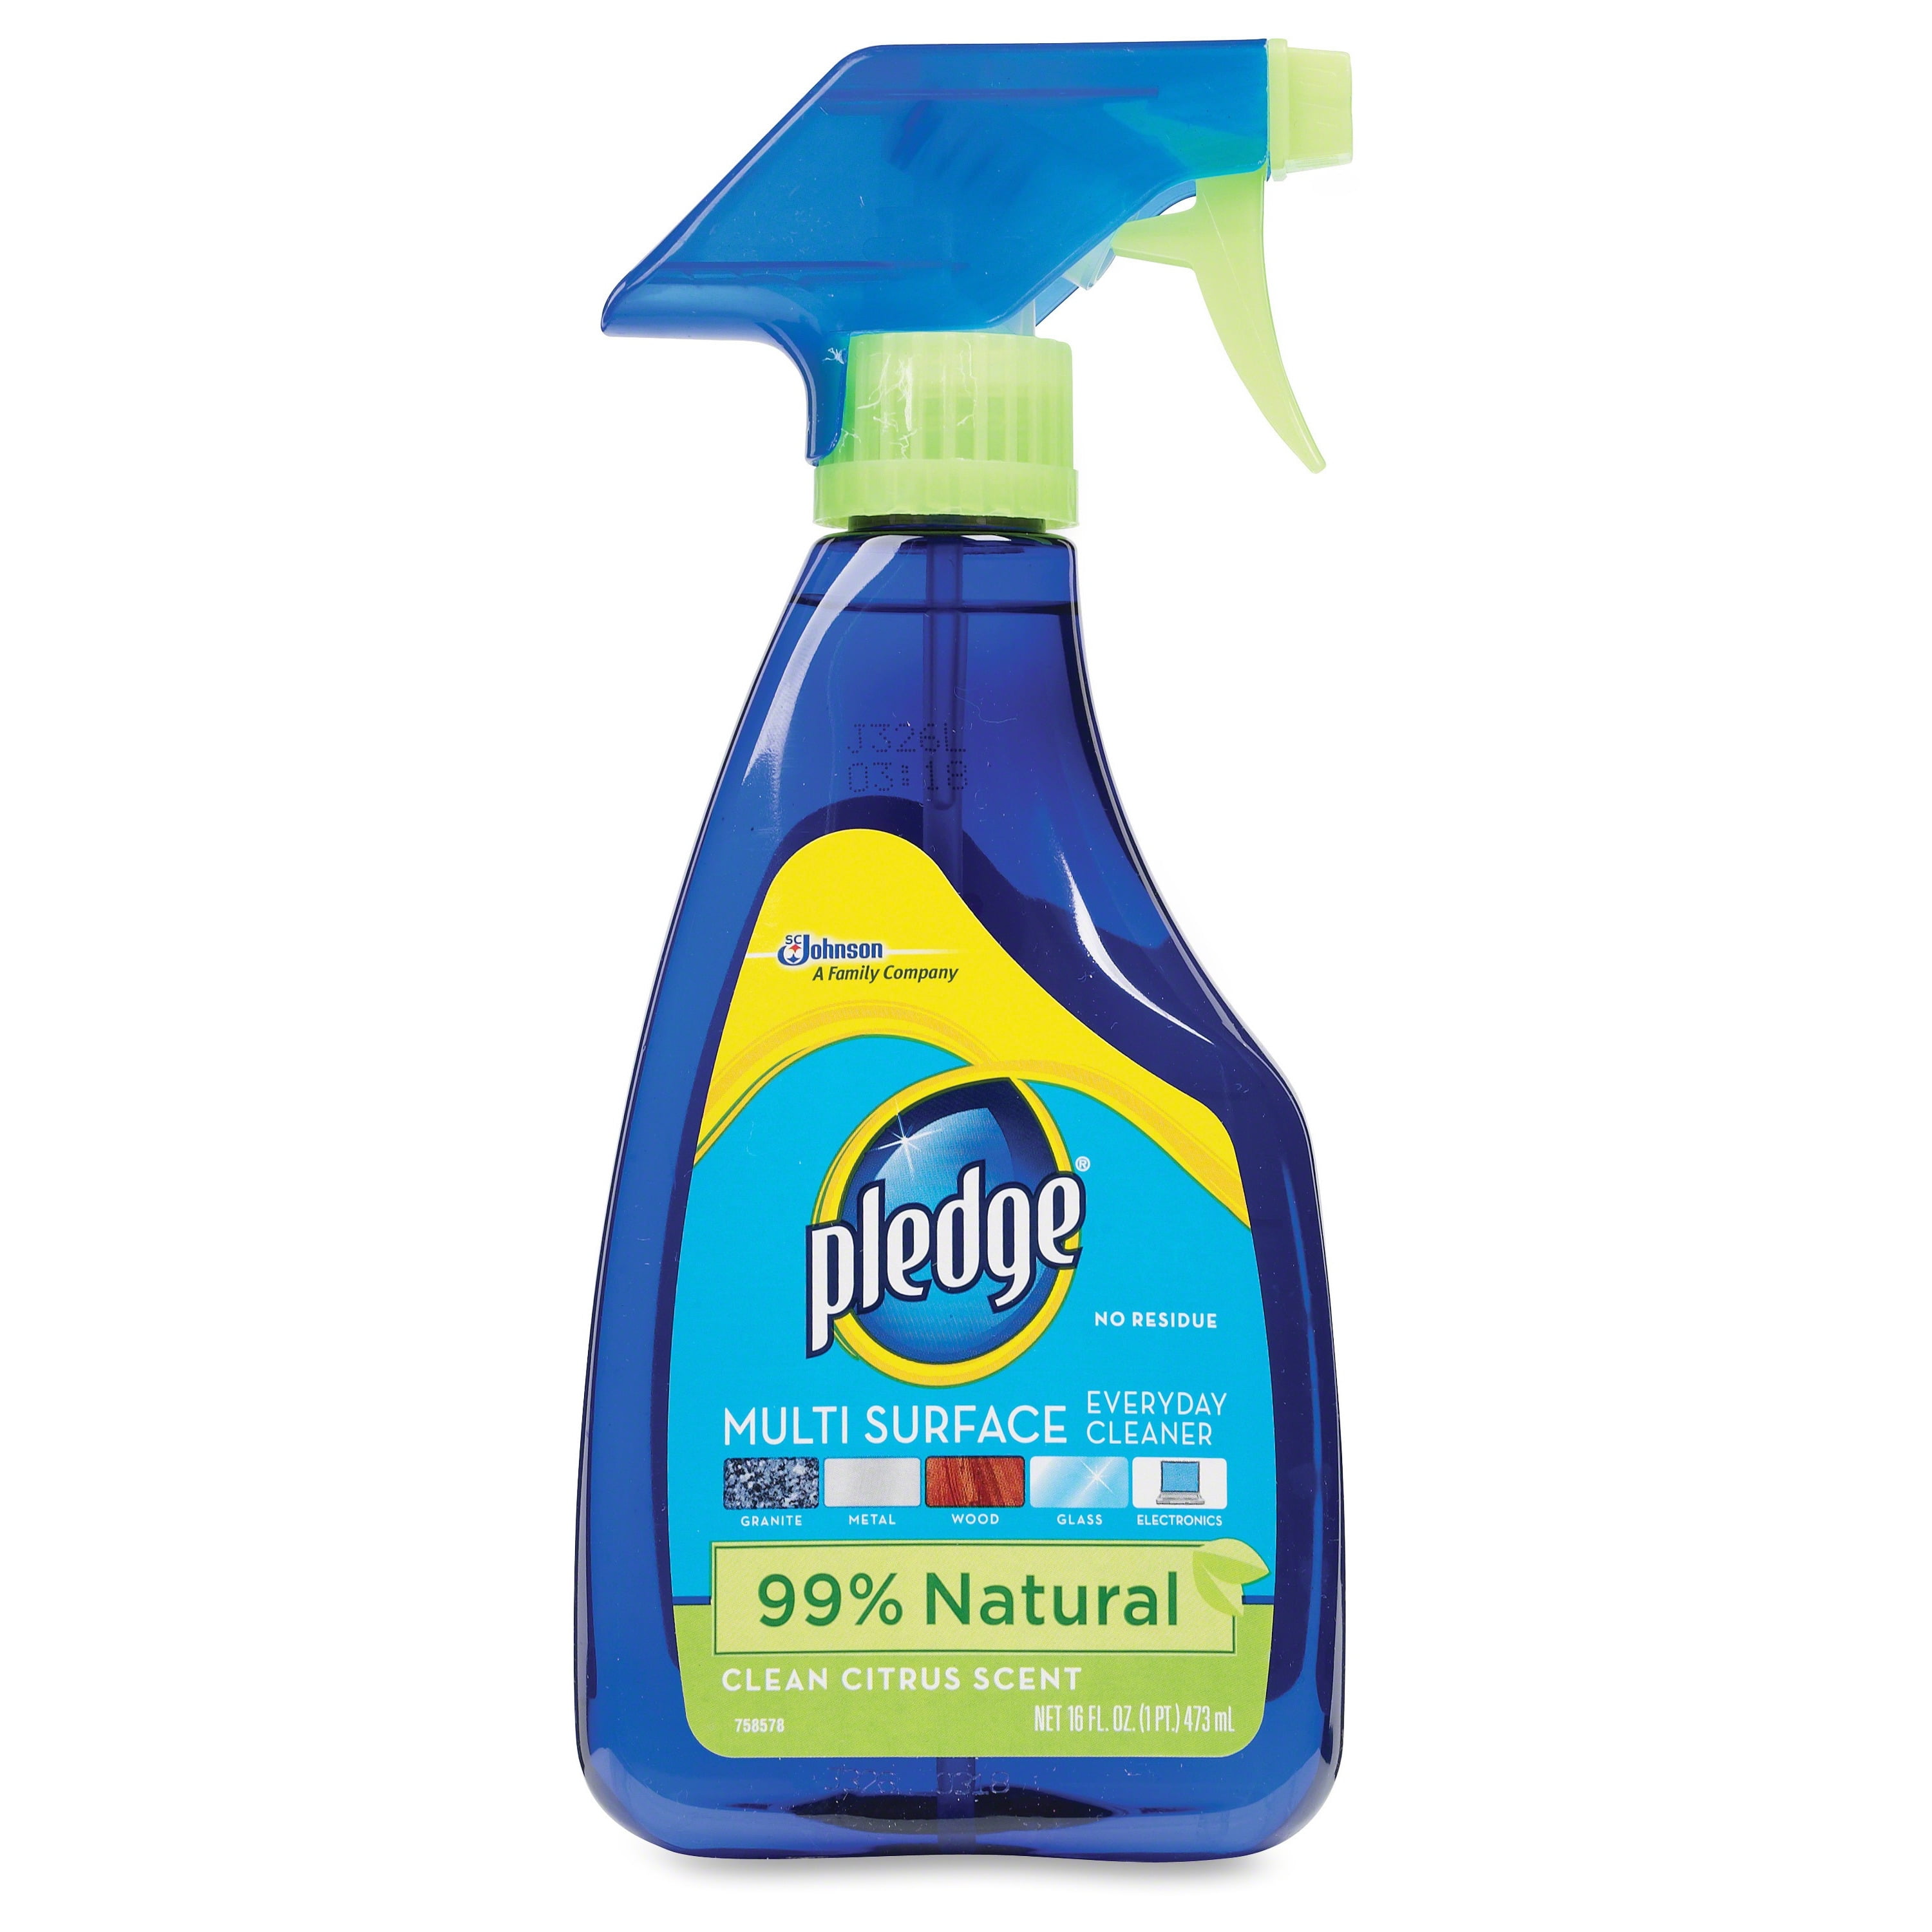 Bubble cleaner!! The magic all clean spray 🤯🤯🤯#cleantok #cleaning #